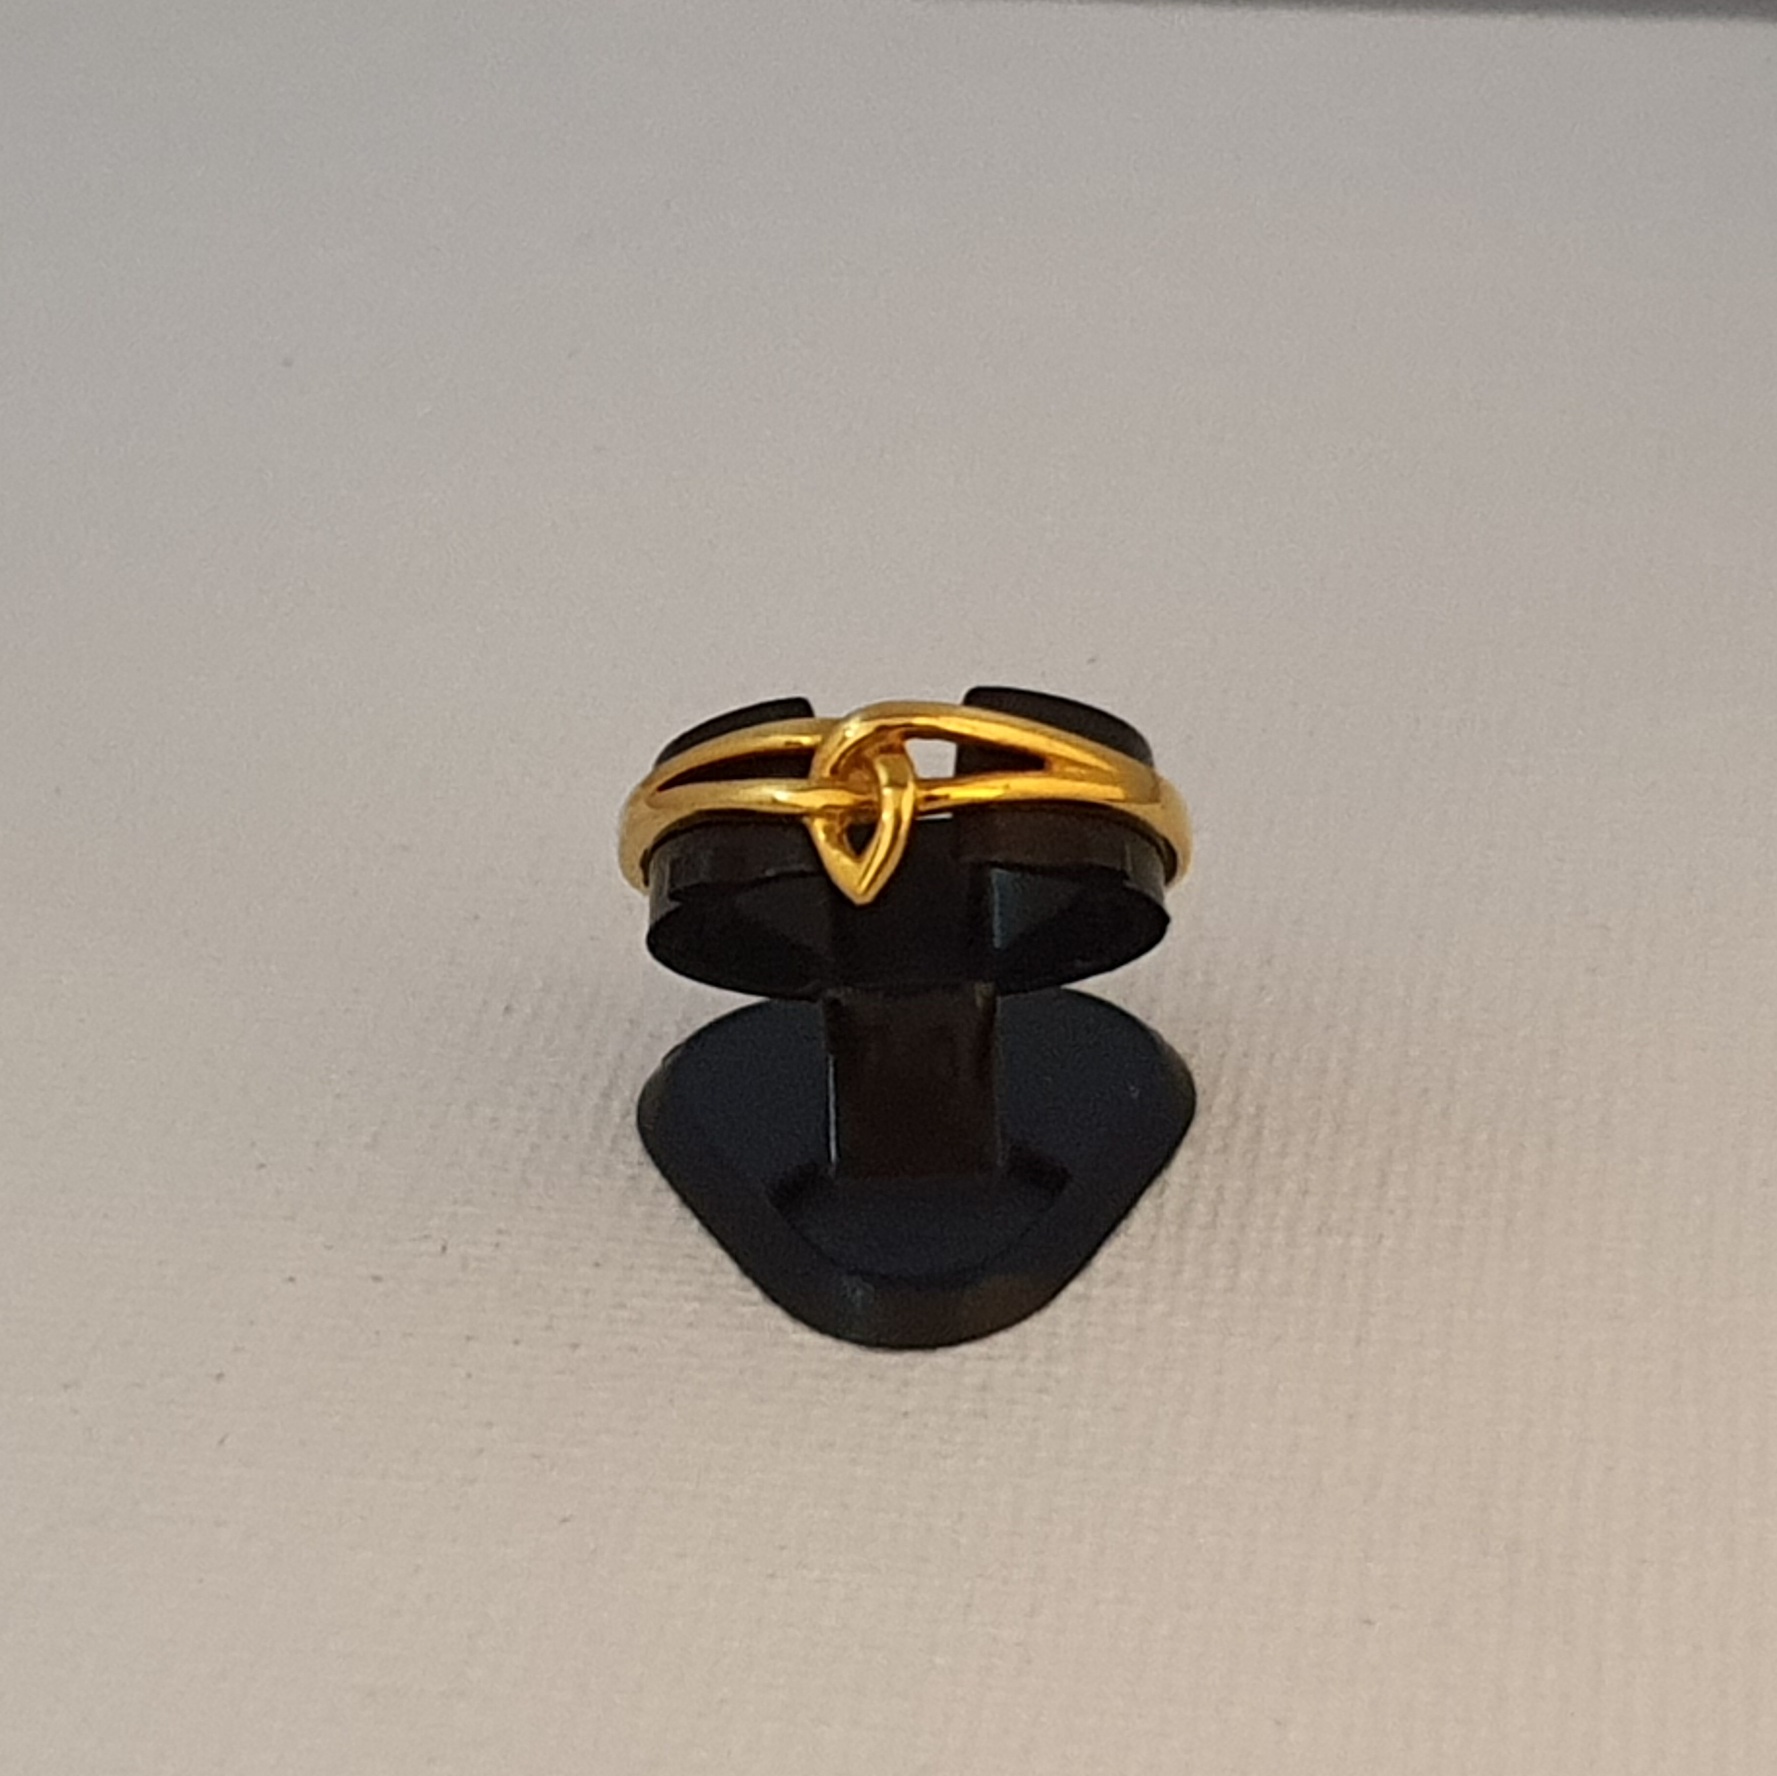 Sold at Auction: A CHINESE YELLOW GOLD RING. Weight 1.8g. Size 15mm.